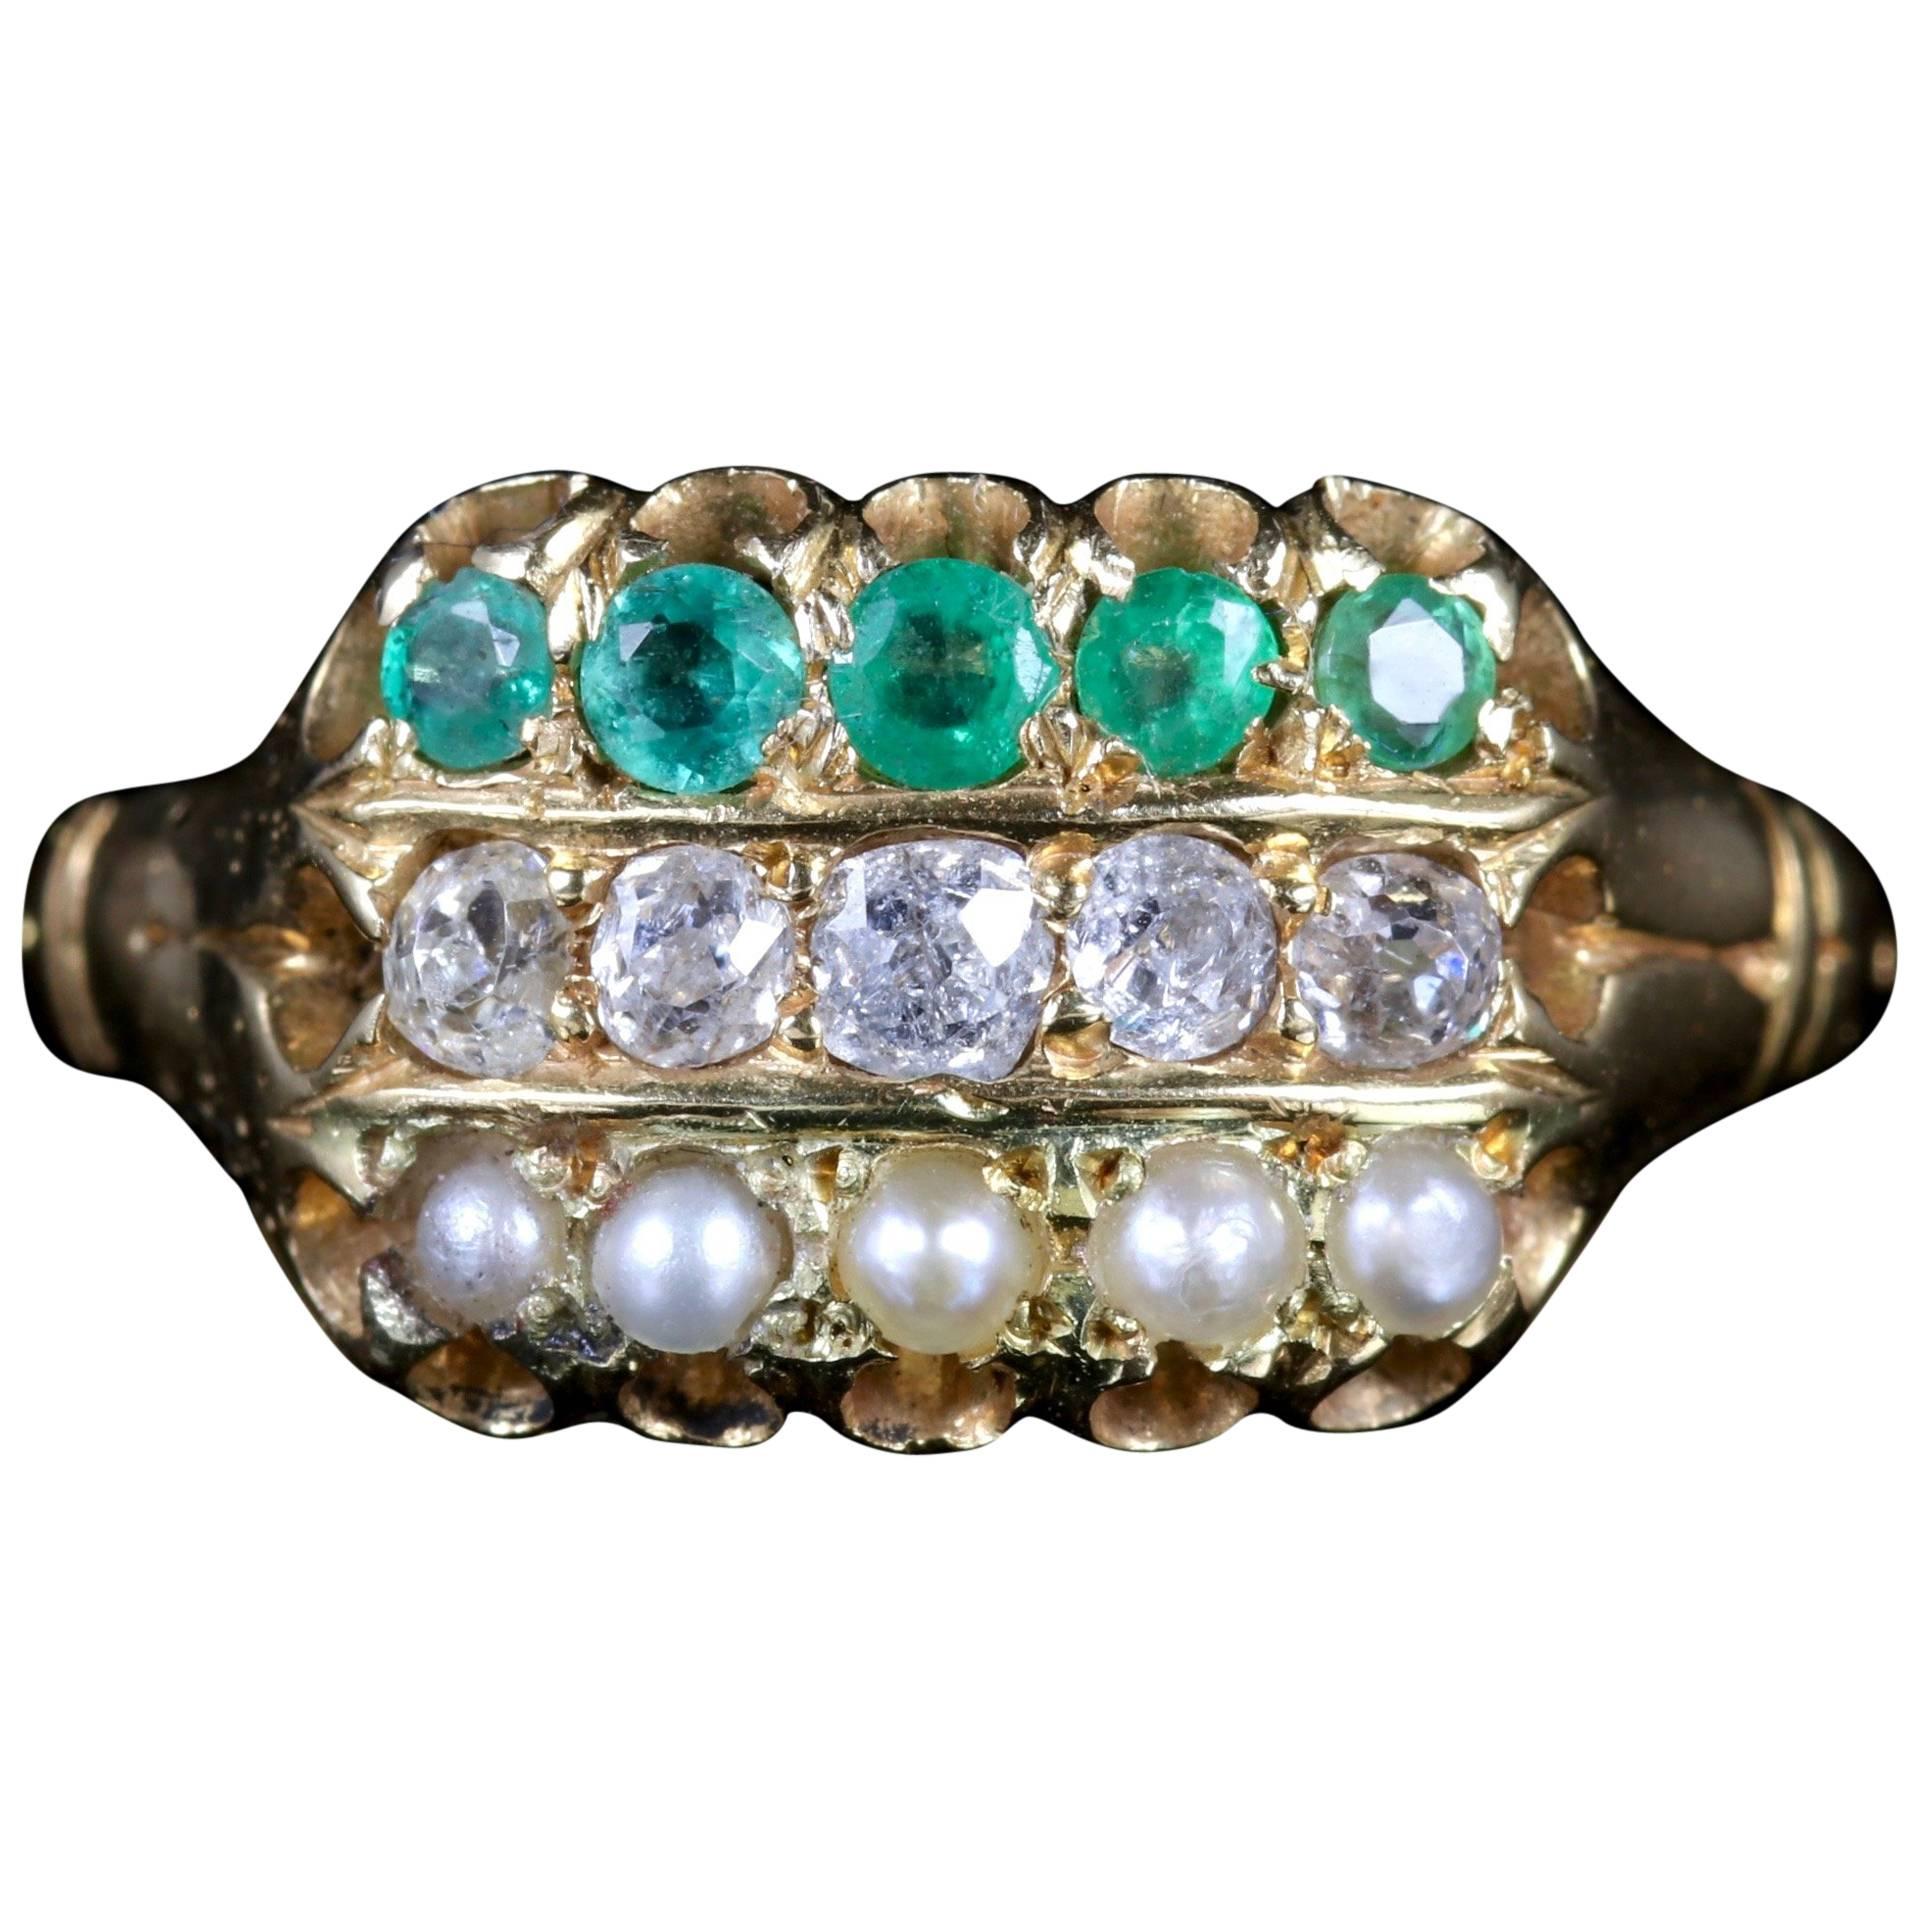 Antique Victorian Emerald Diamond Pearl Ring 18 Carat Gold Dated 1882